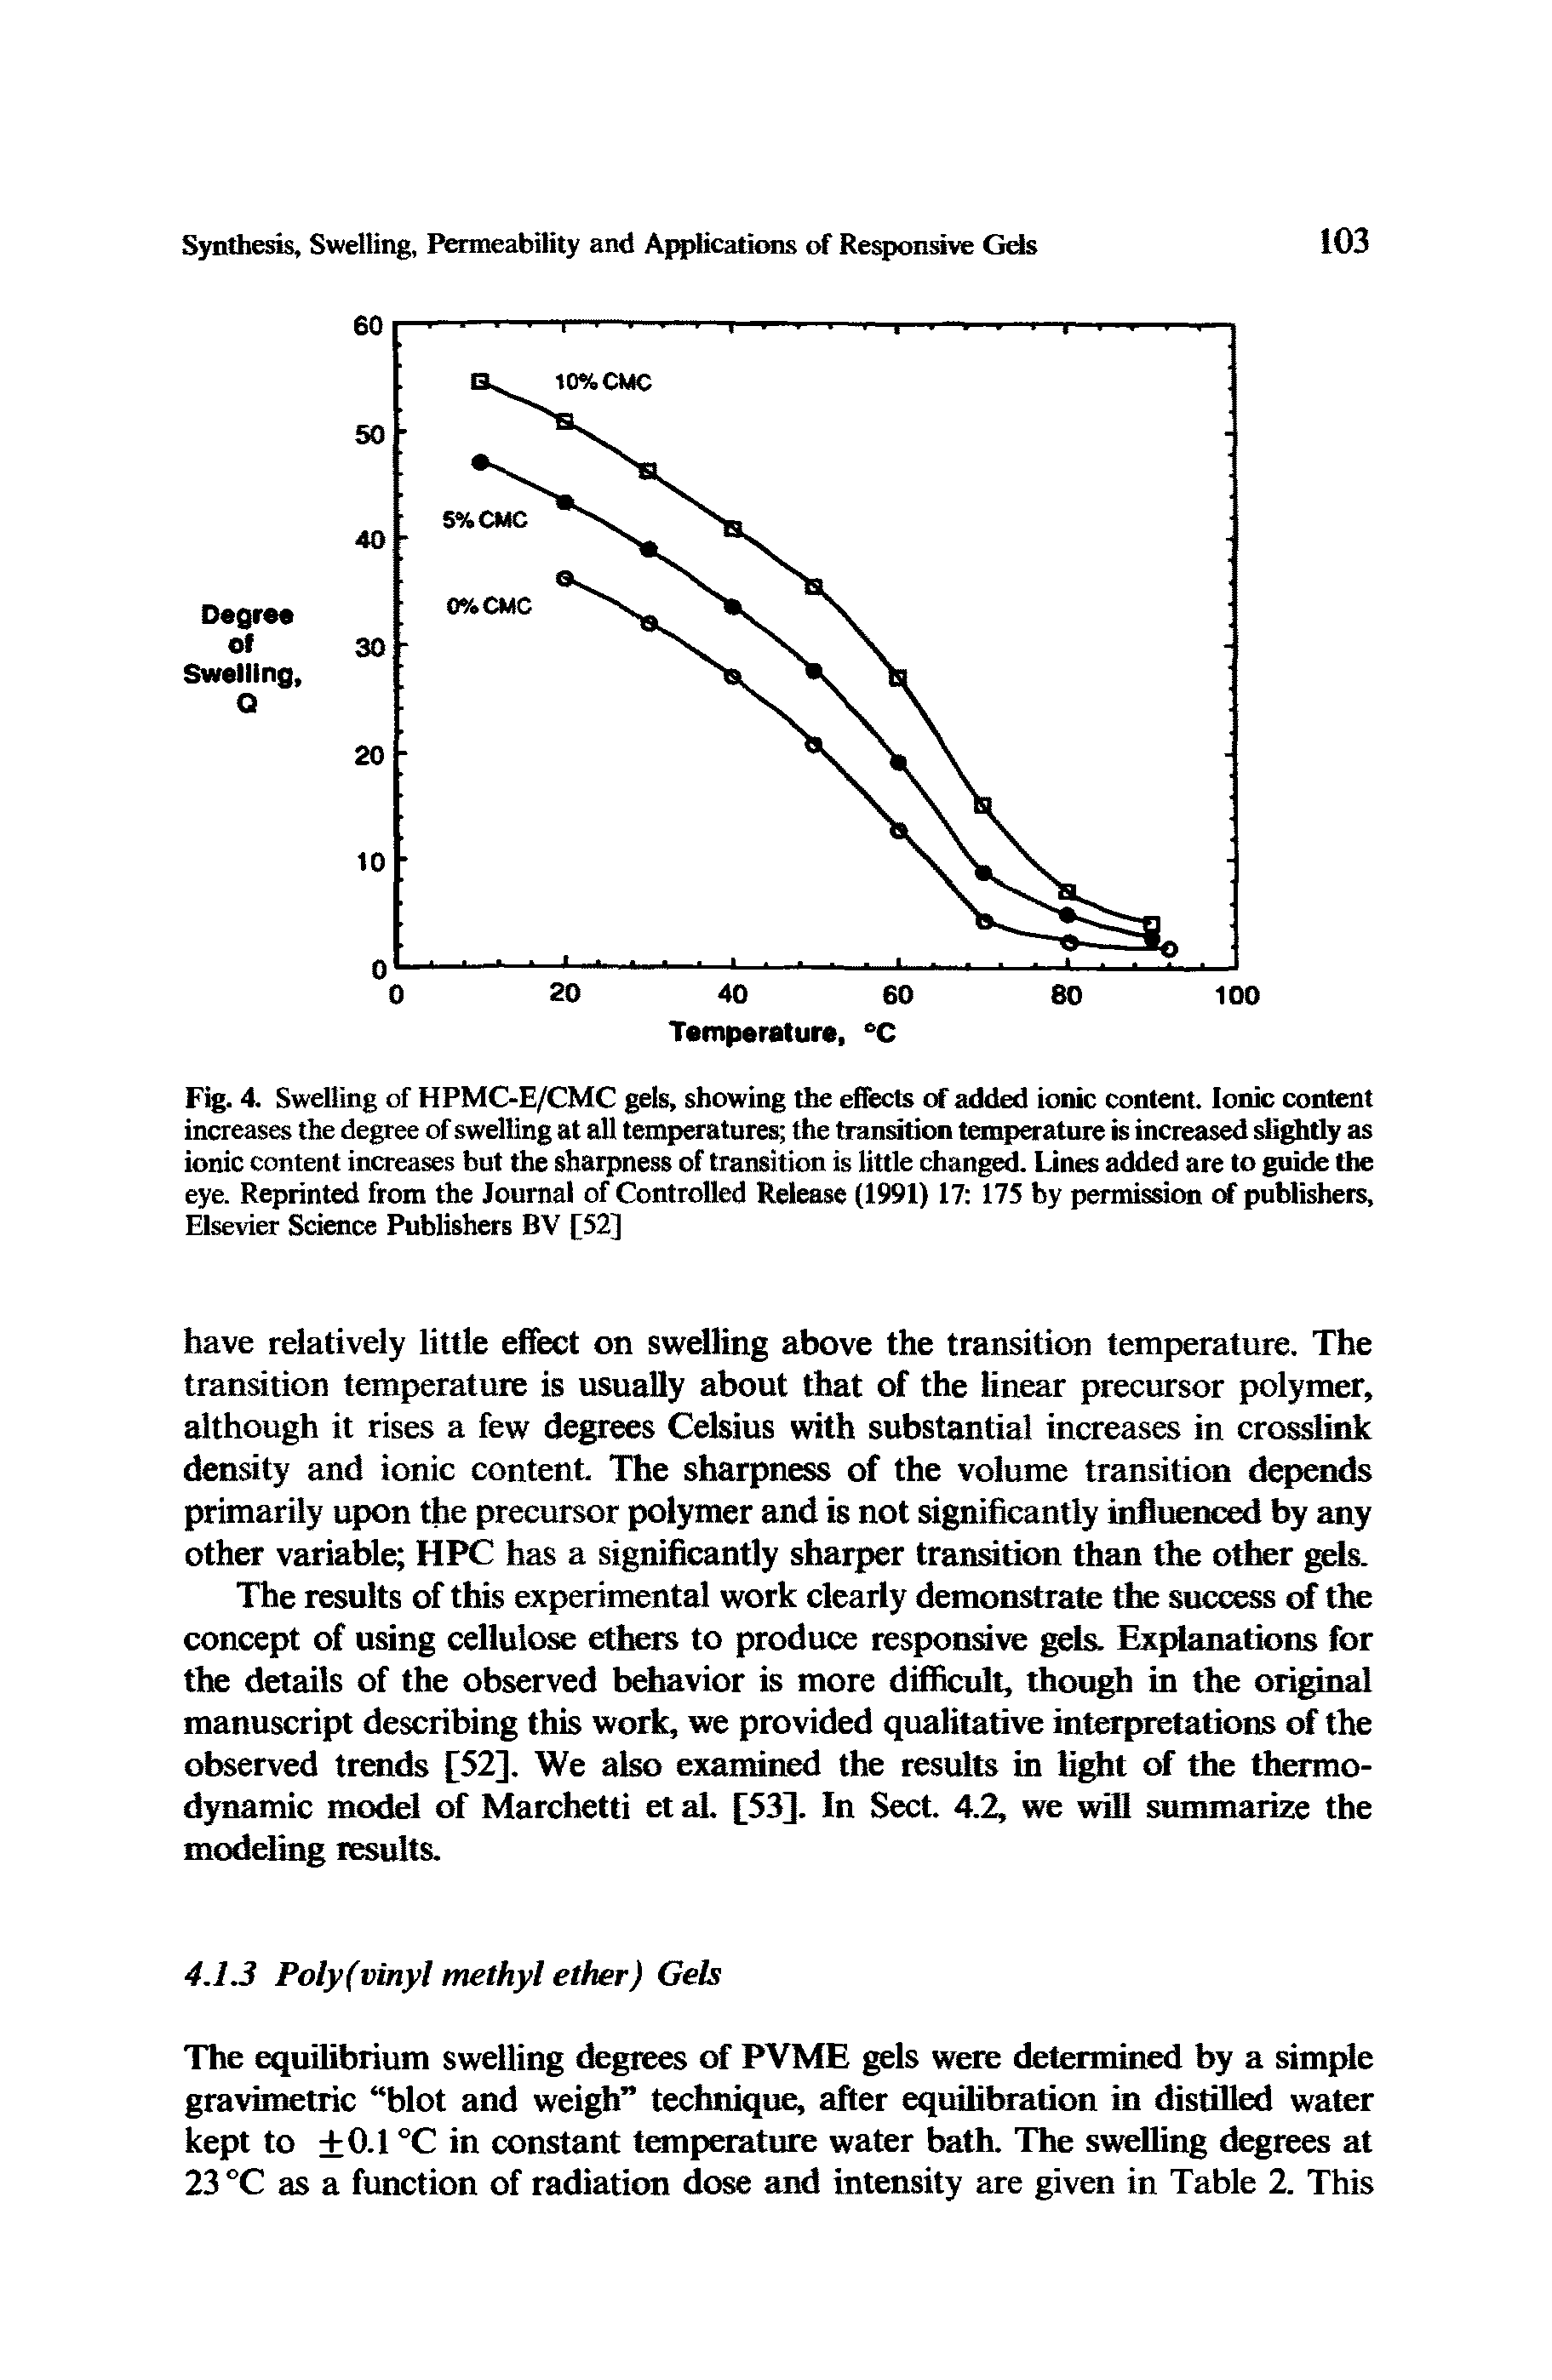 Fig. 4. Swelling of HPMC-E/CMC gels, showing the effects of added ionic content. Ionic content increases the degree of swelling at all temperatures the transition temperature is increased slightly as ionic content increases but the sharpness of transition is little changed. Lines added are to guide the eye. Reprinted from the Journal of Controlled Release (1991) 17 175 by permission of publishers, Elsevier Science Publishers BV [52]...